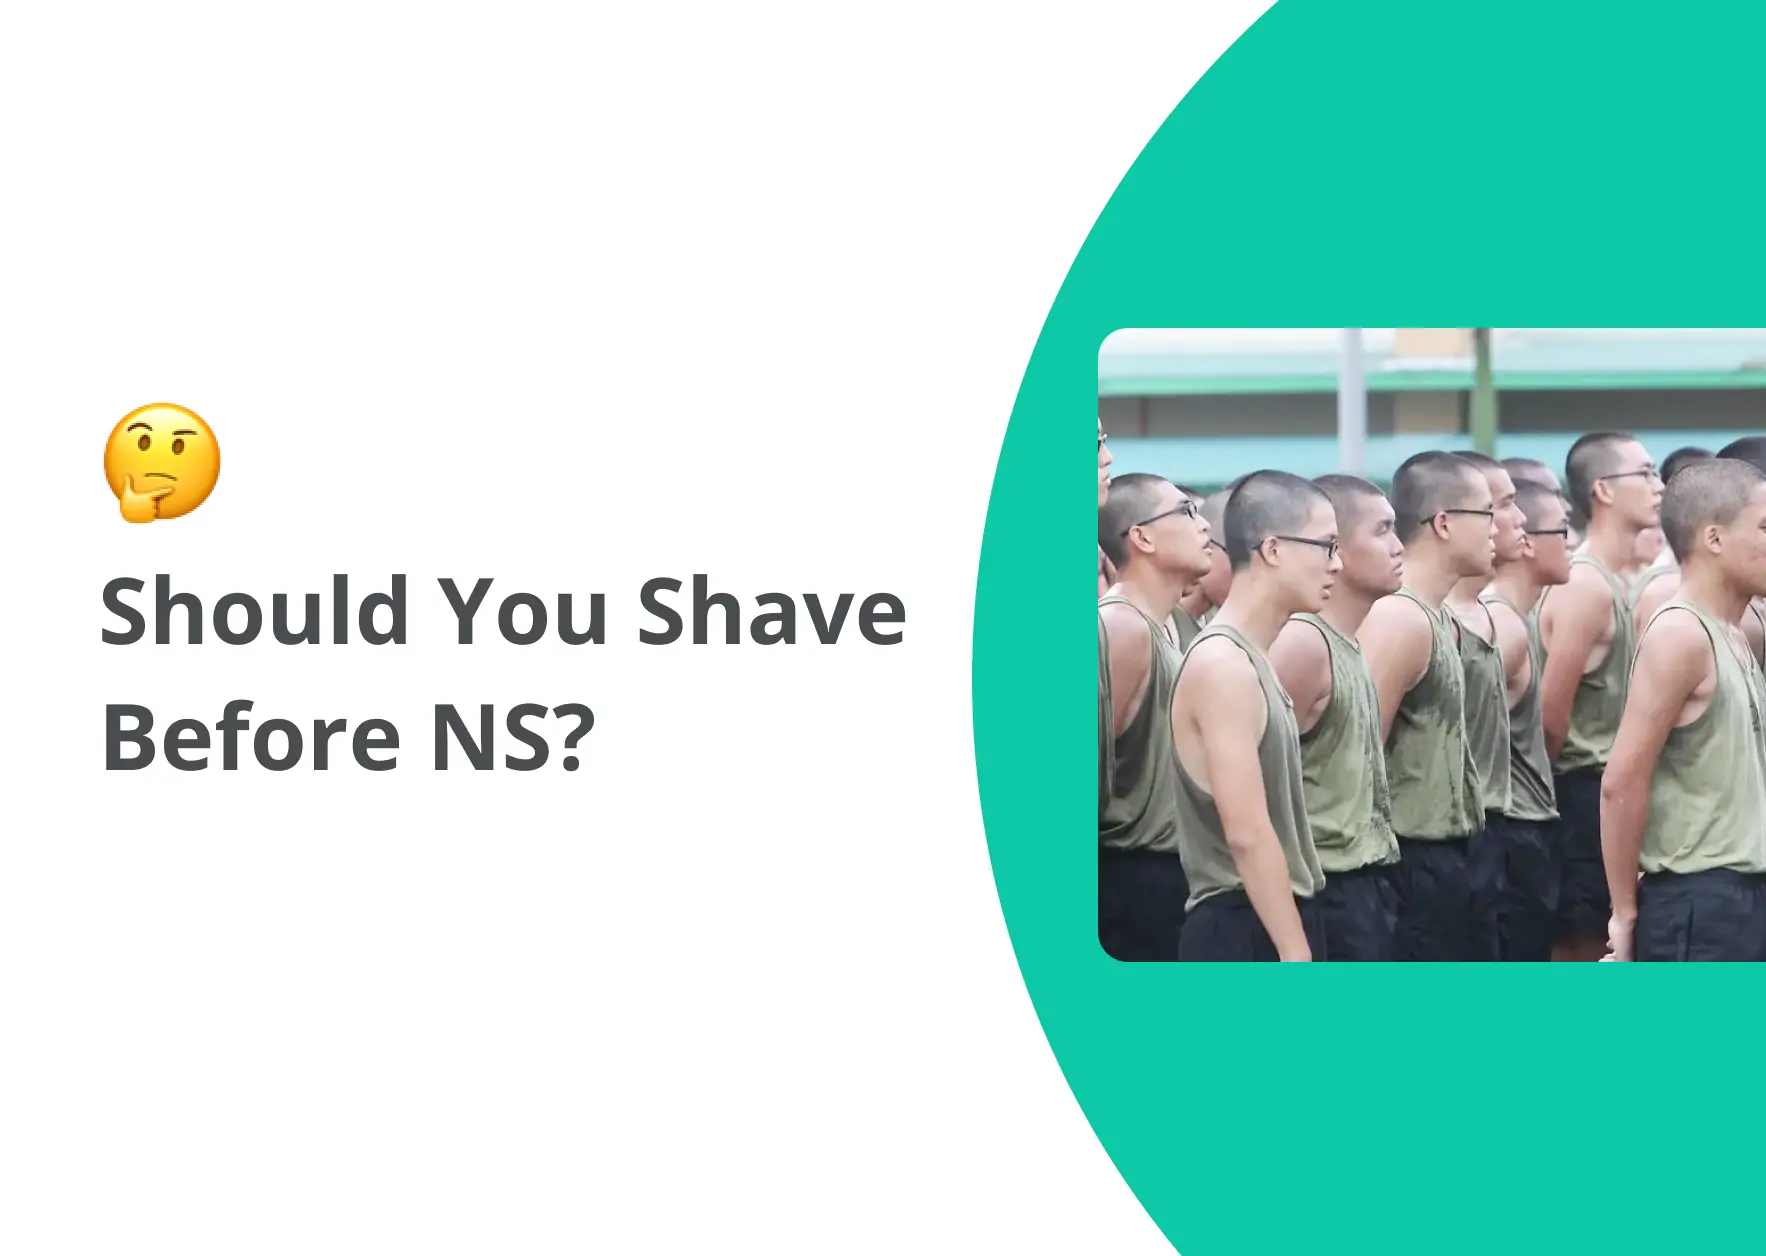 Shave NS